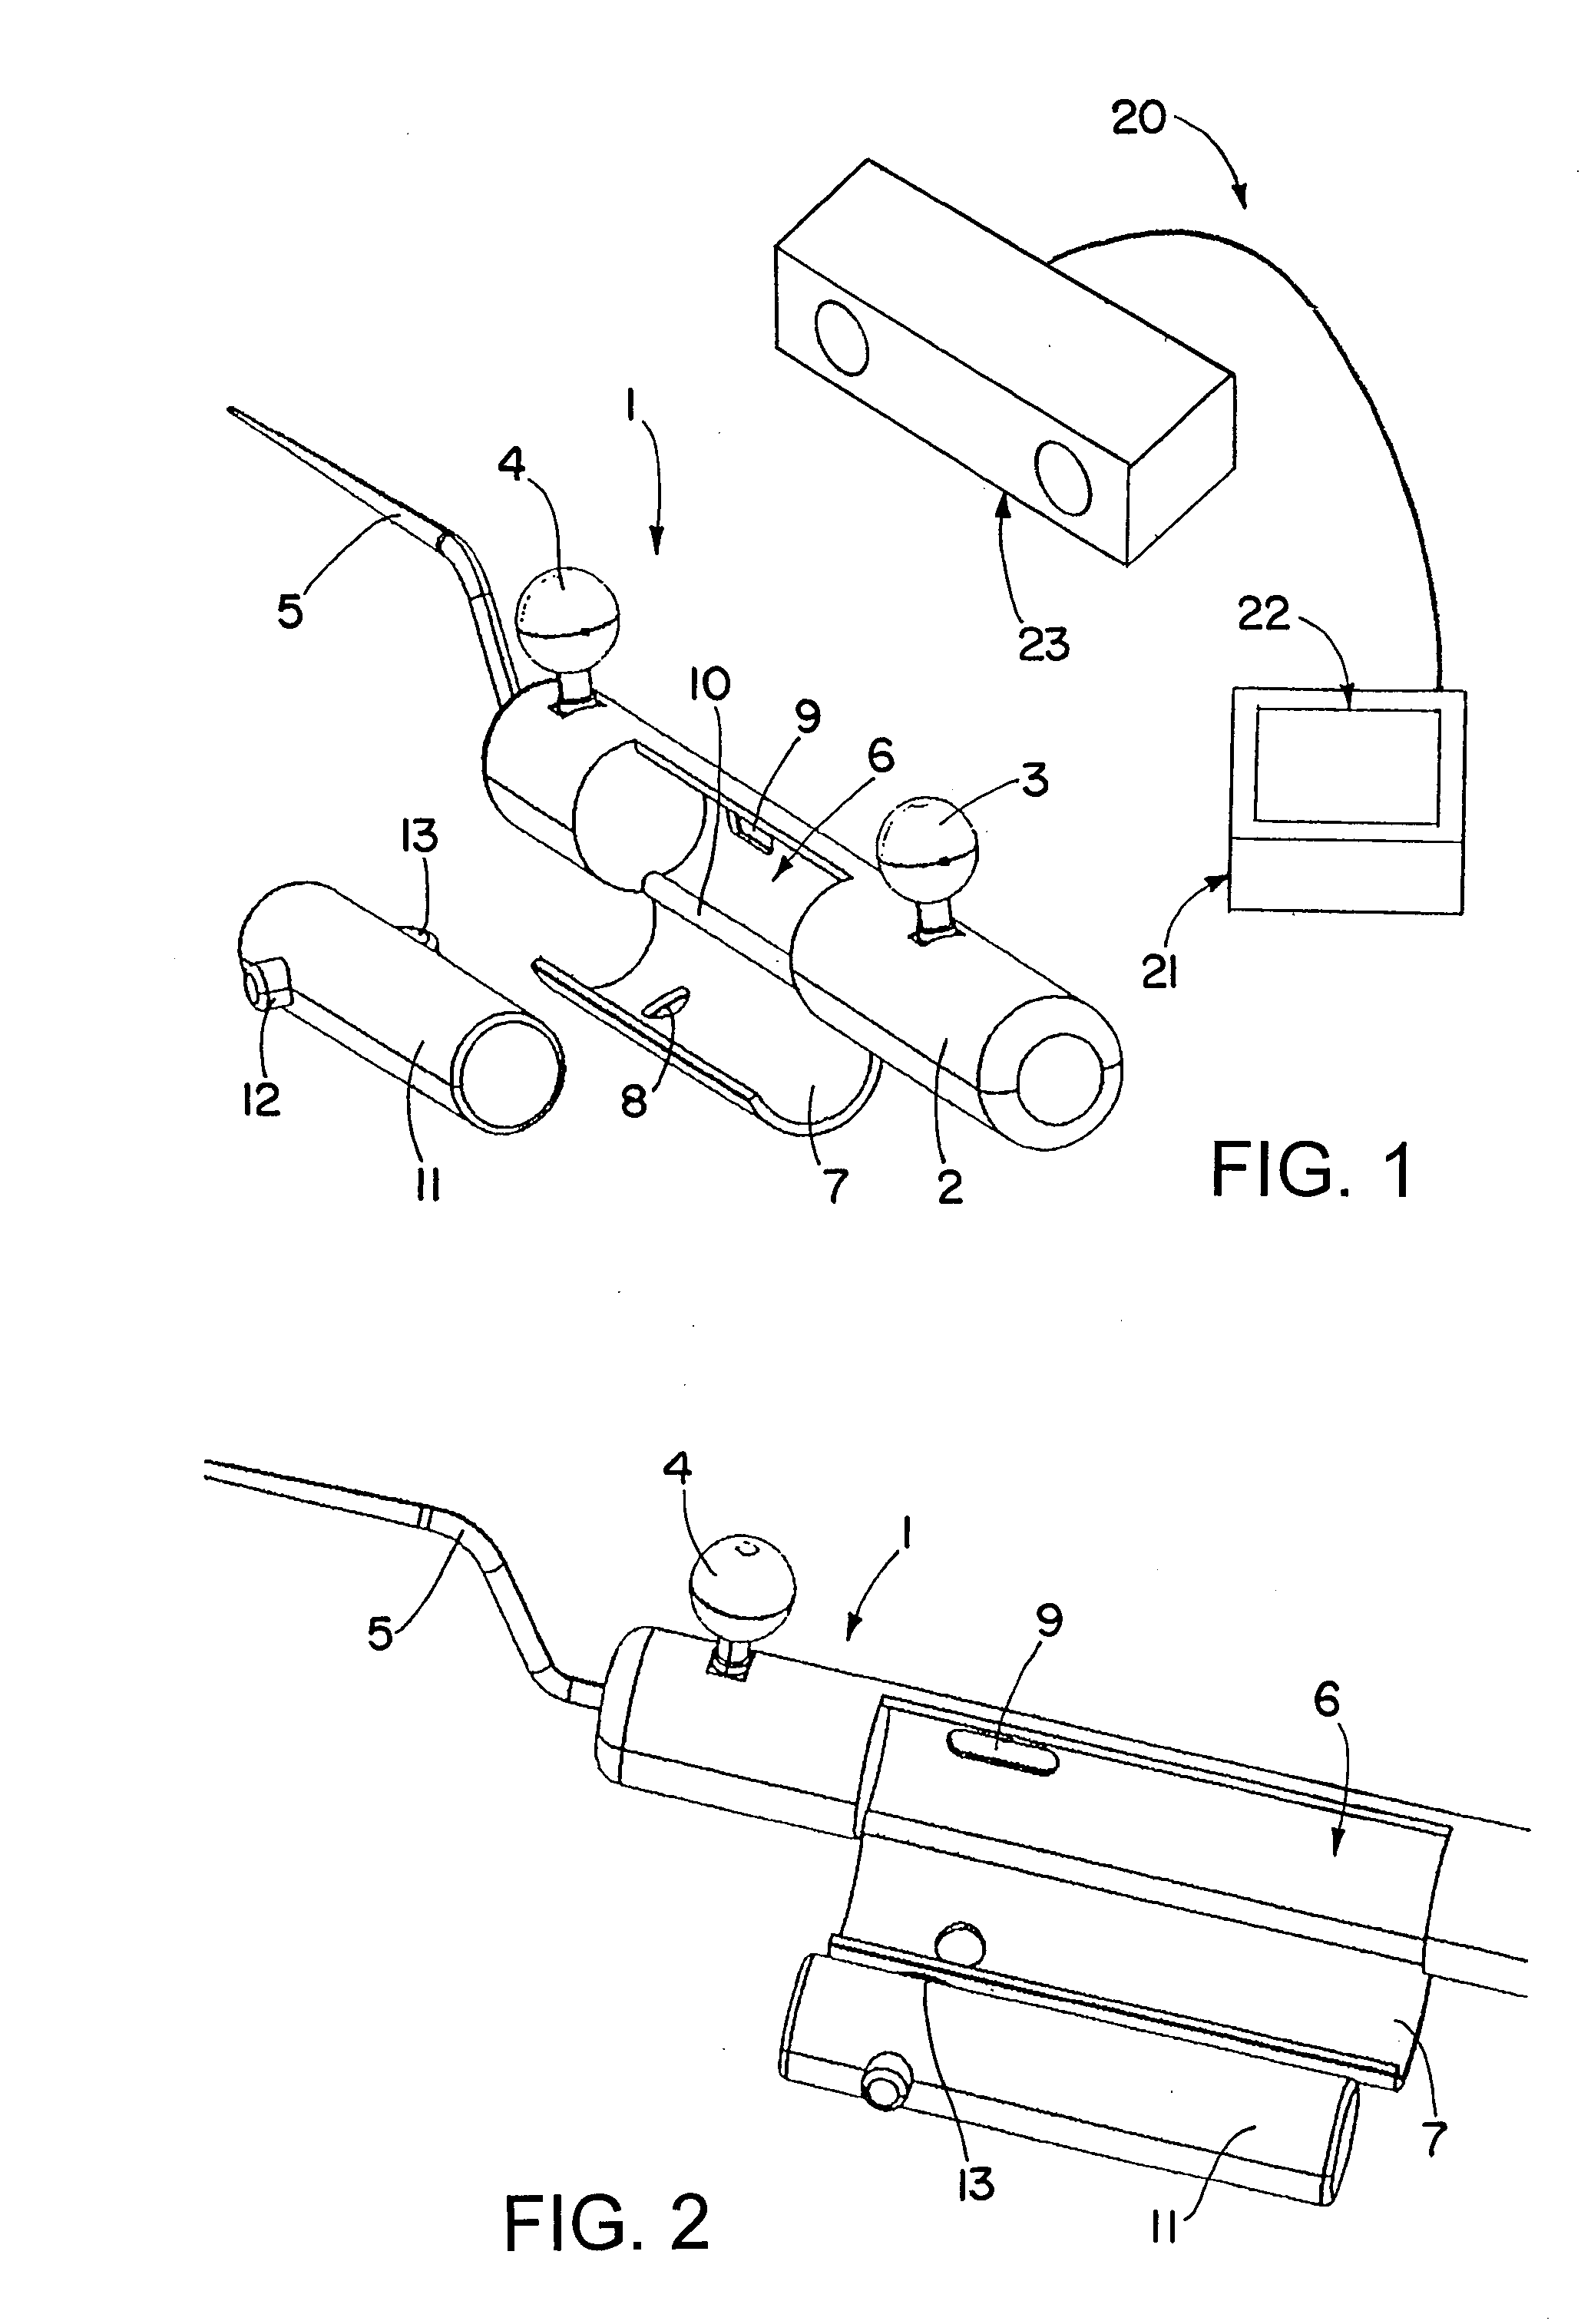 Medical instrument having a separate transmitter for controlling medical treatment software